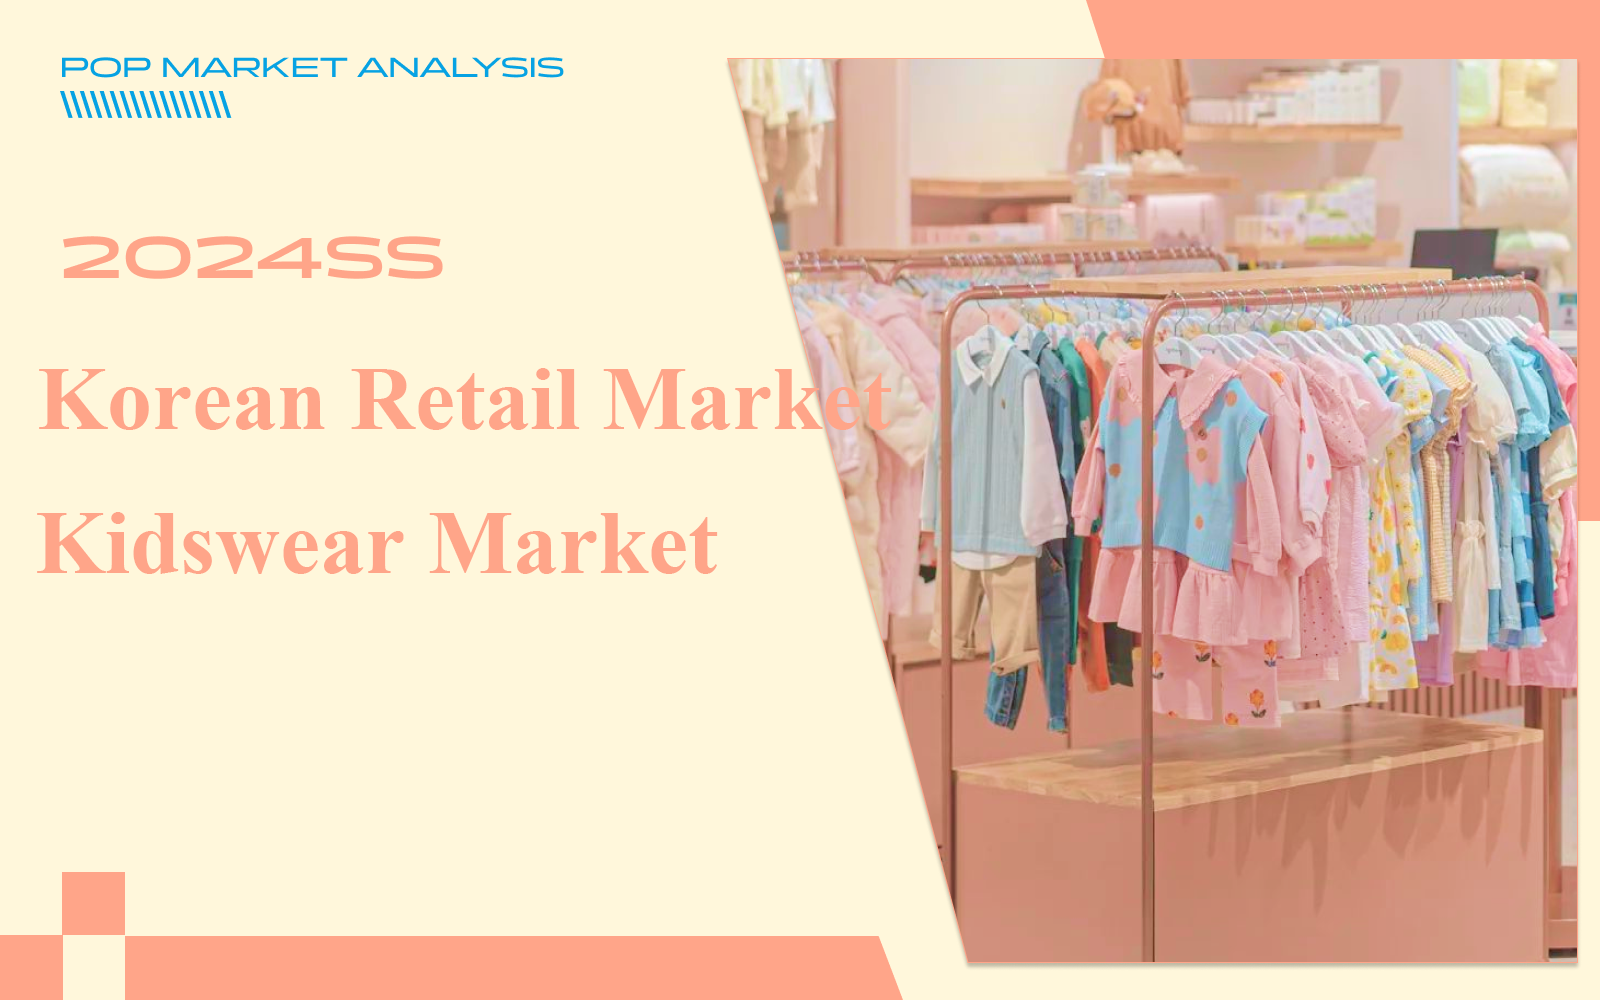 The Comprehensive Analysis of Kidswear Retail Market in South Korea in January